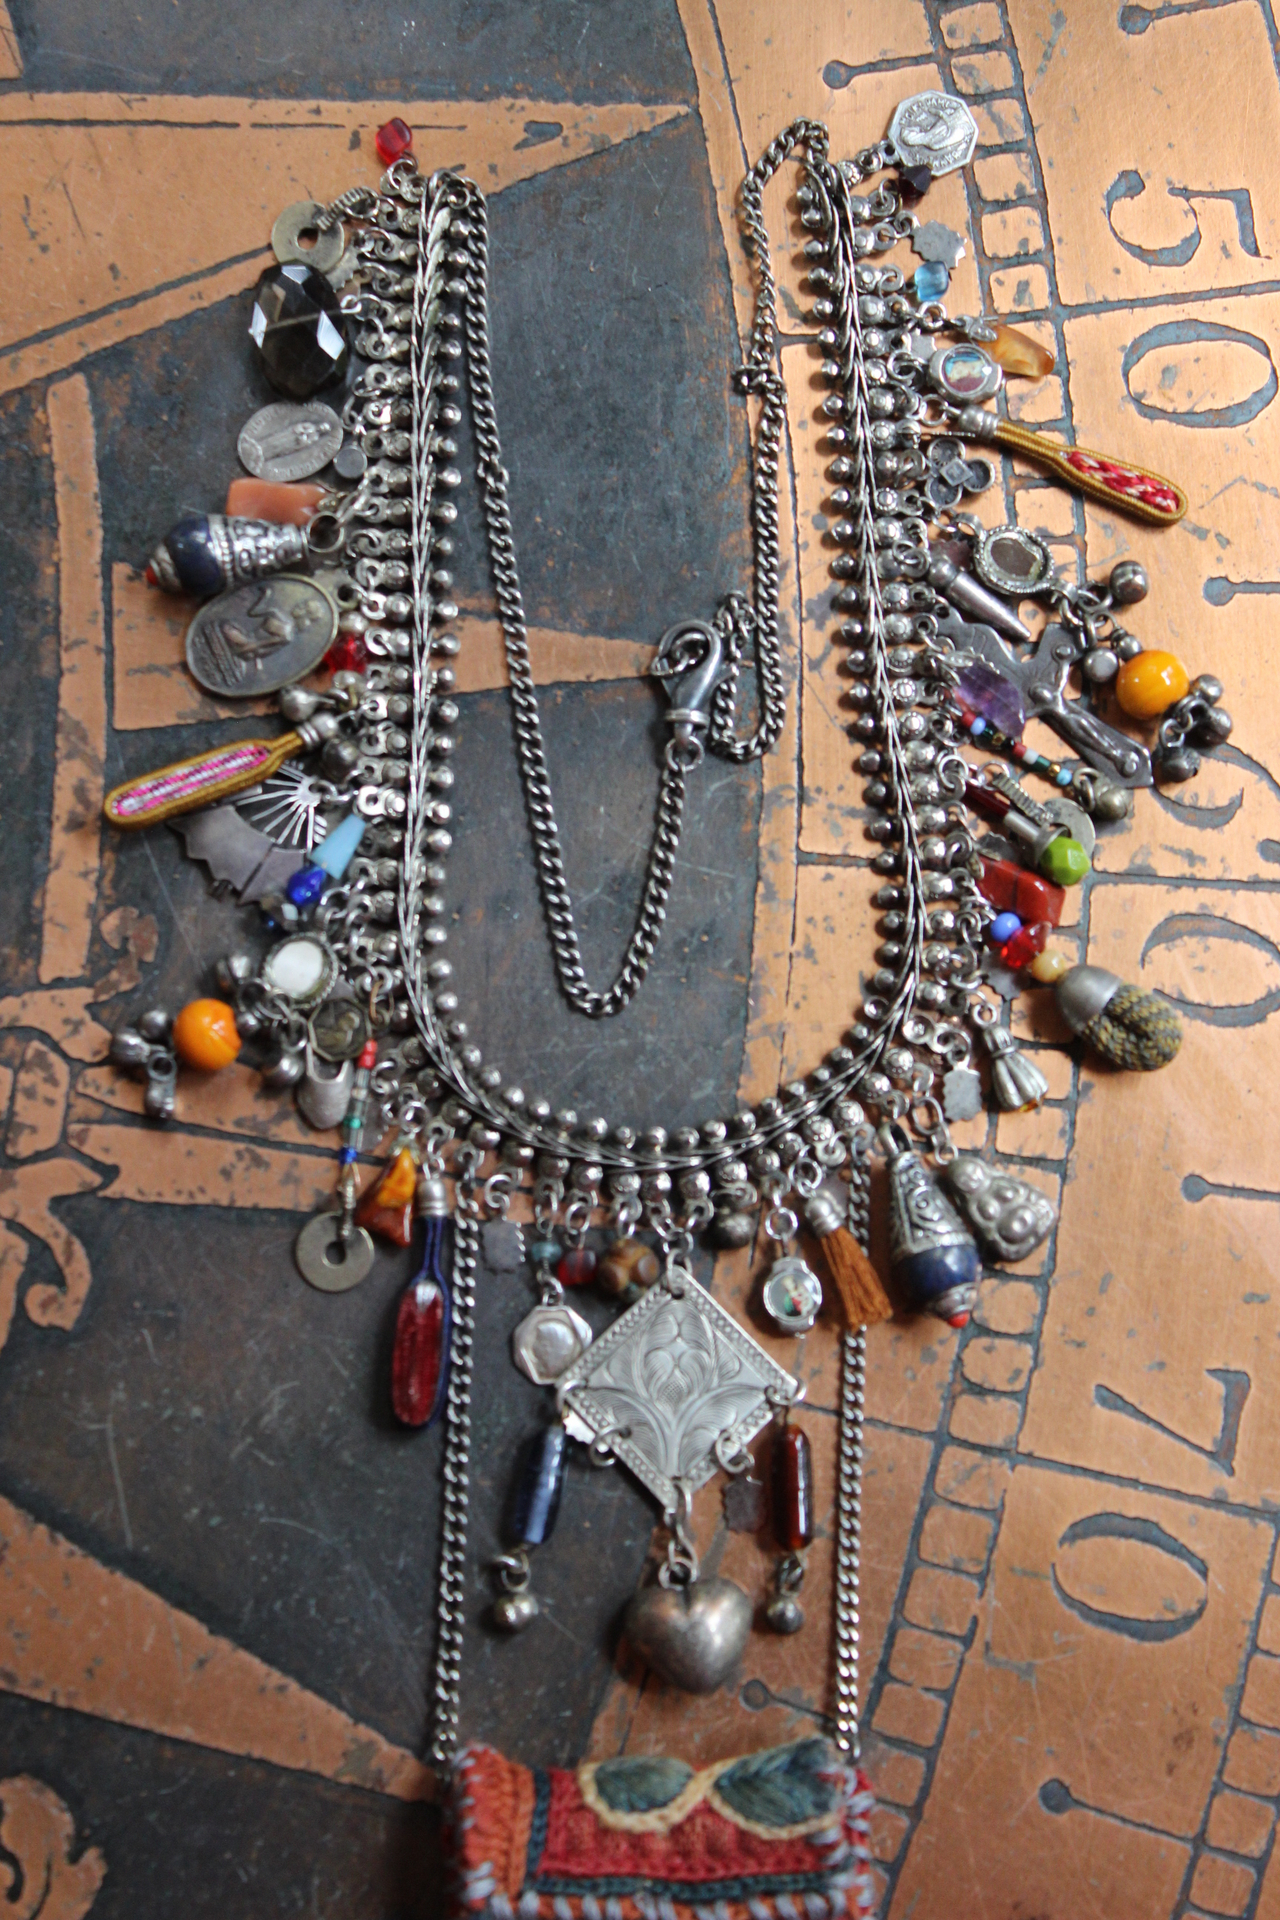 She Chooses Wisely Necklace with Small Antique Lambani Textile Pouch and Dozens of Antique & Vintage Drops, Medals and Findings